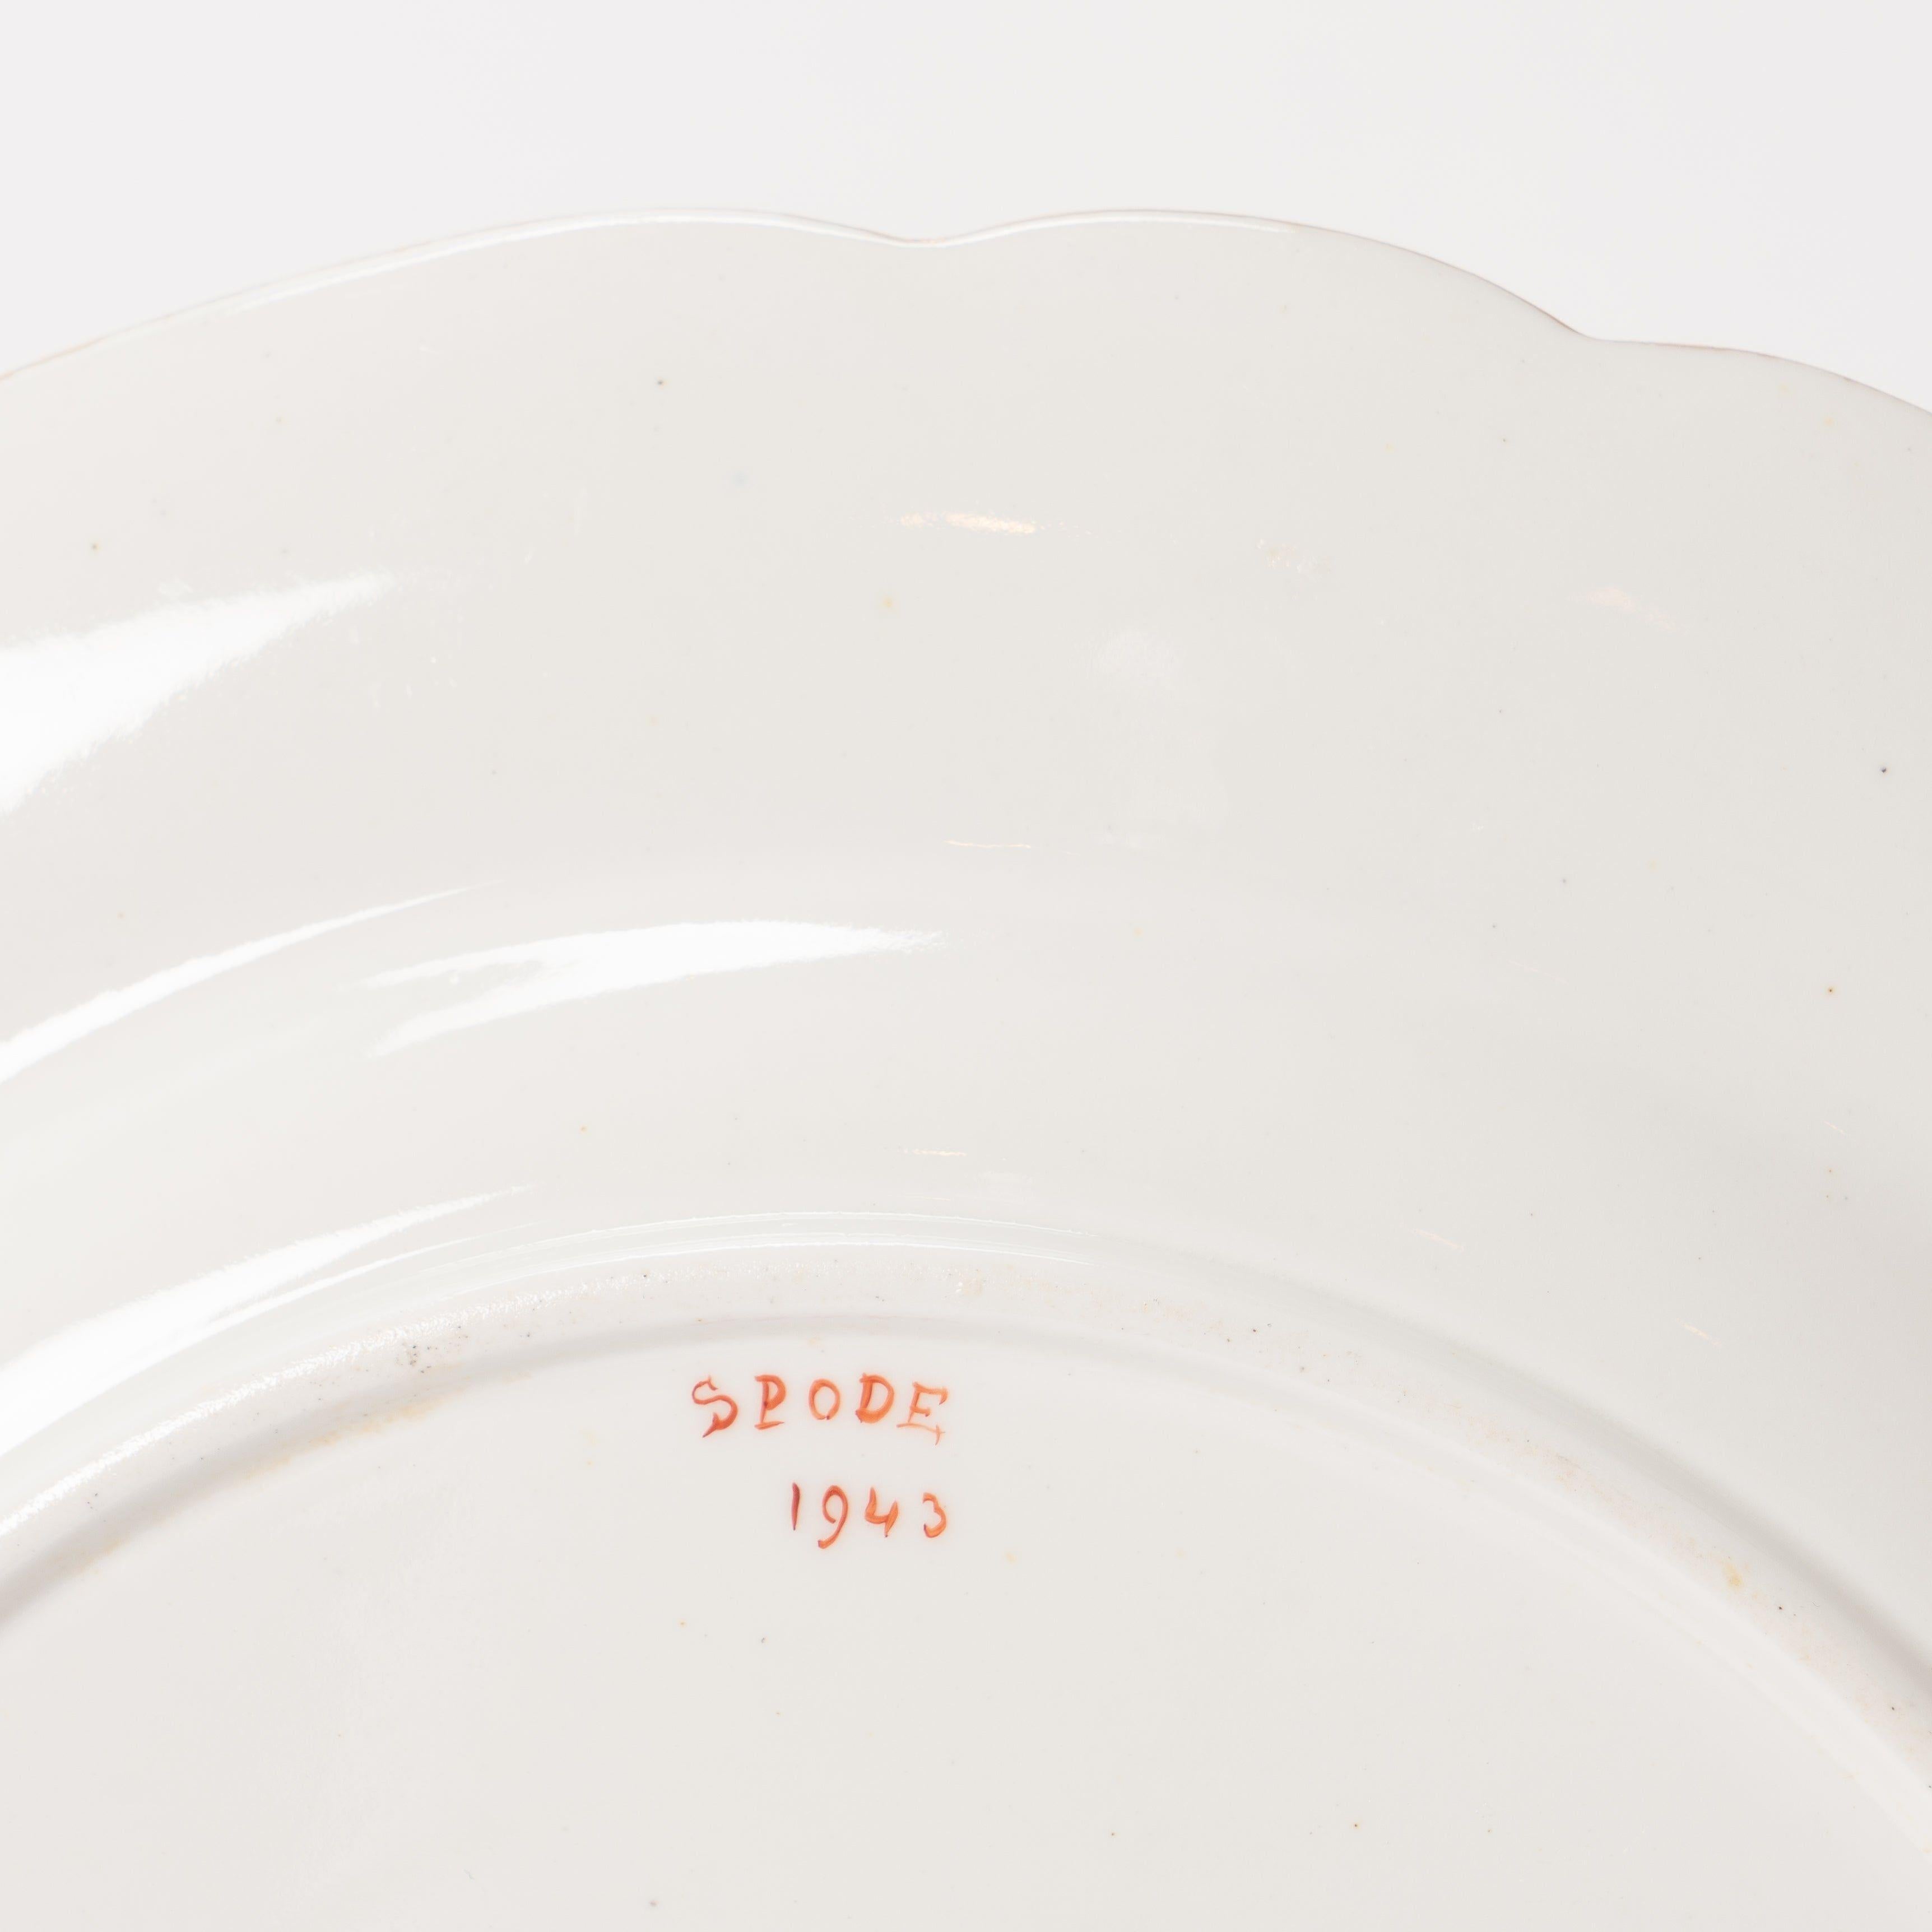 Set of 12 Dinner Plates and 8 Dessert Plates in Bone China by Spode For Sale 1